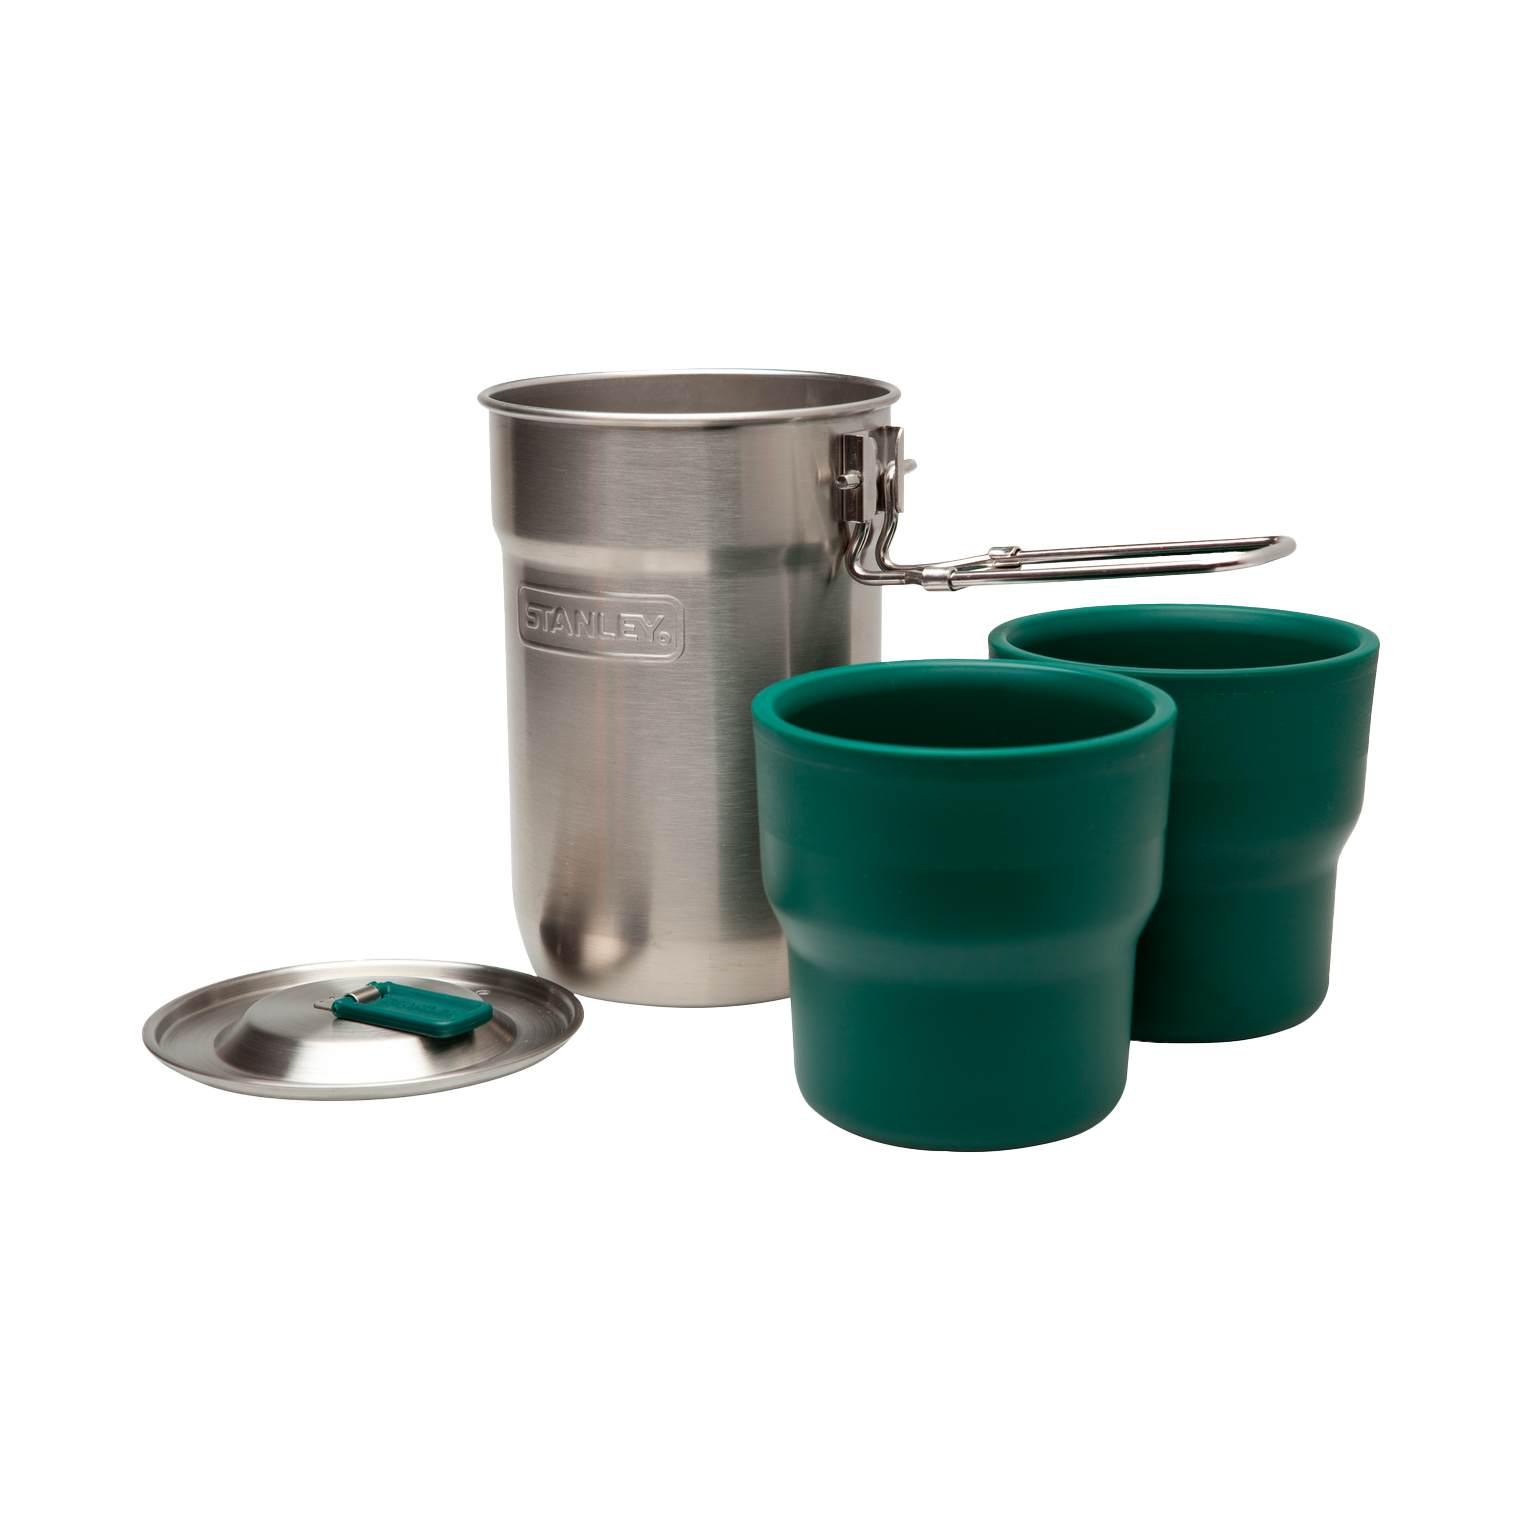 Adventure Nesting Two Cup Cookset: Stainless